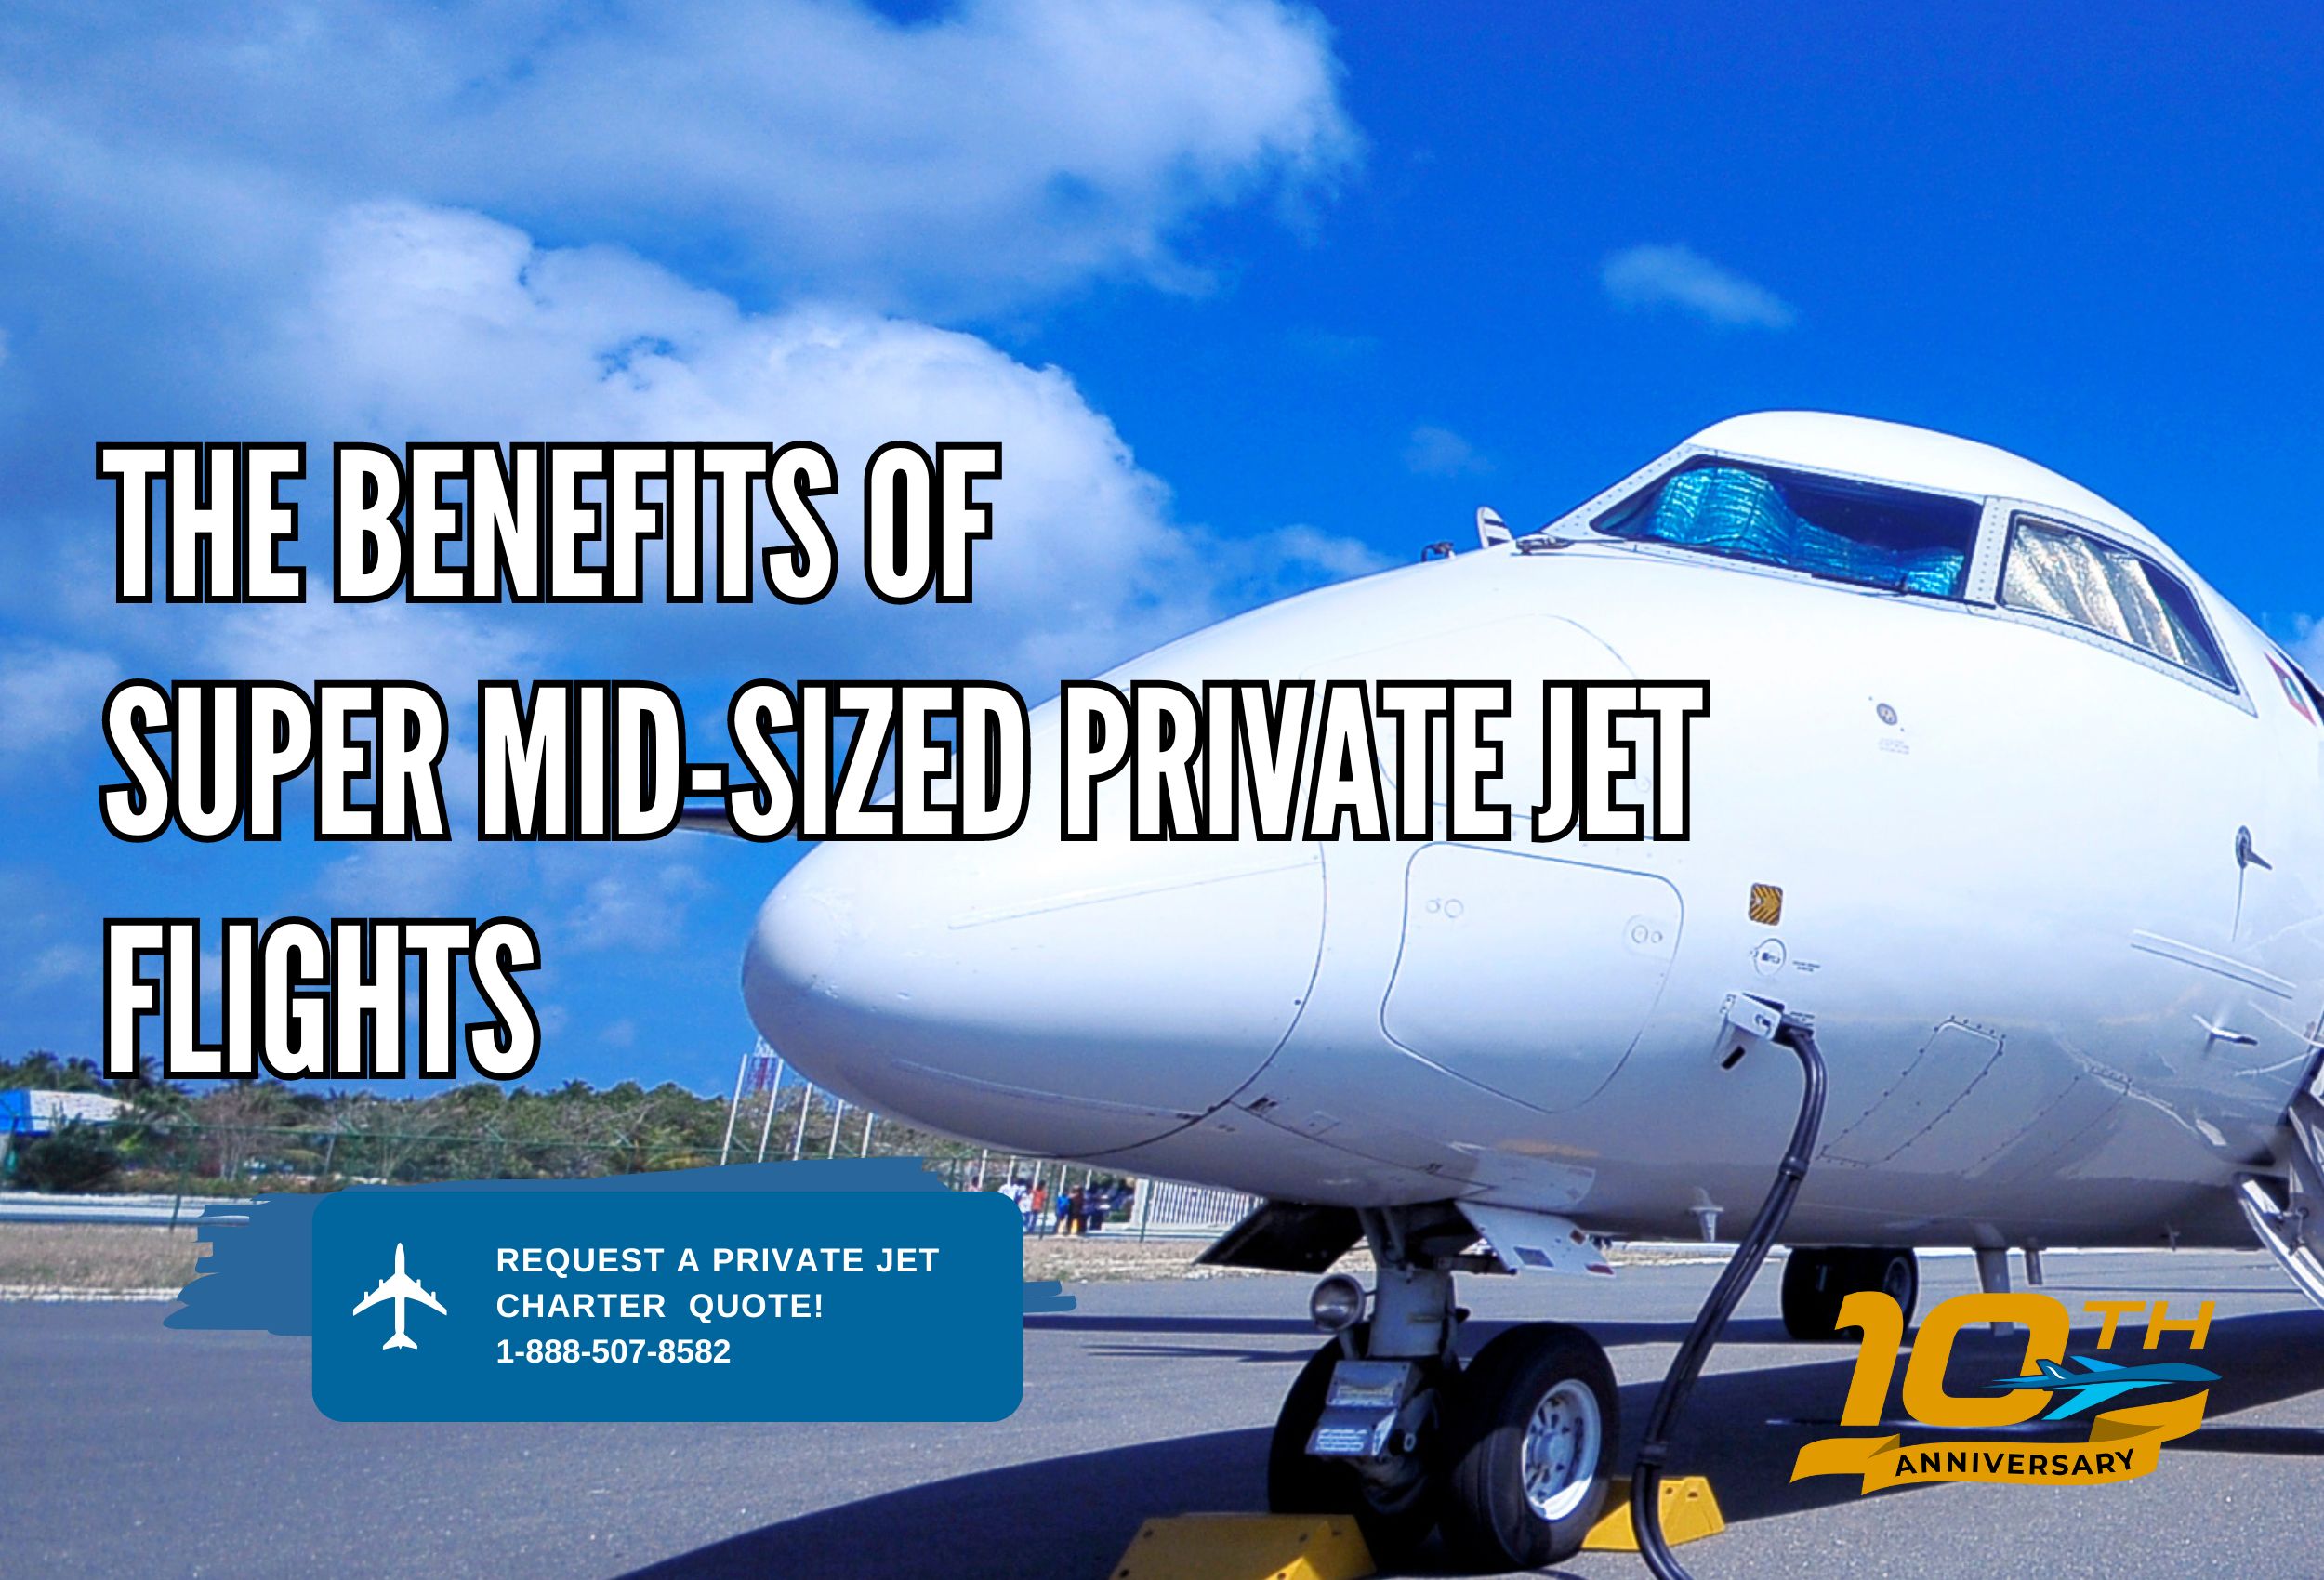 The Benefits of Super Mid-Sized Private Jet Flights